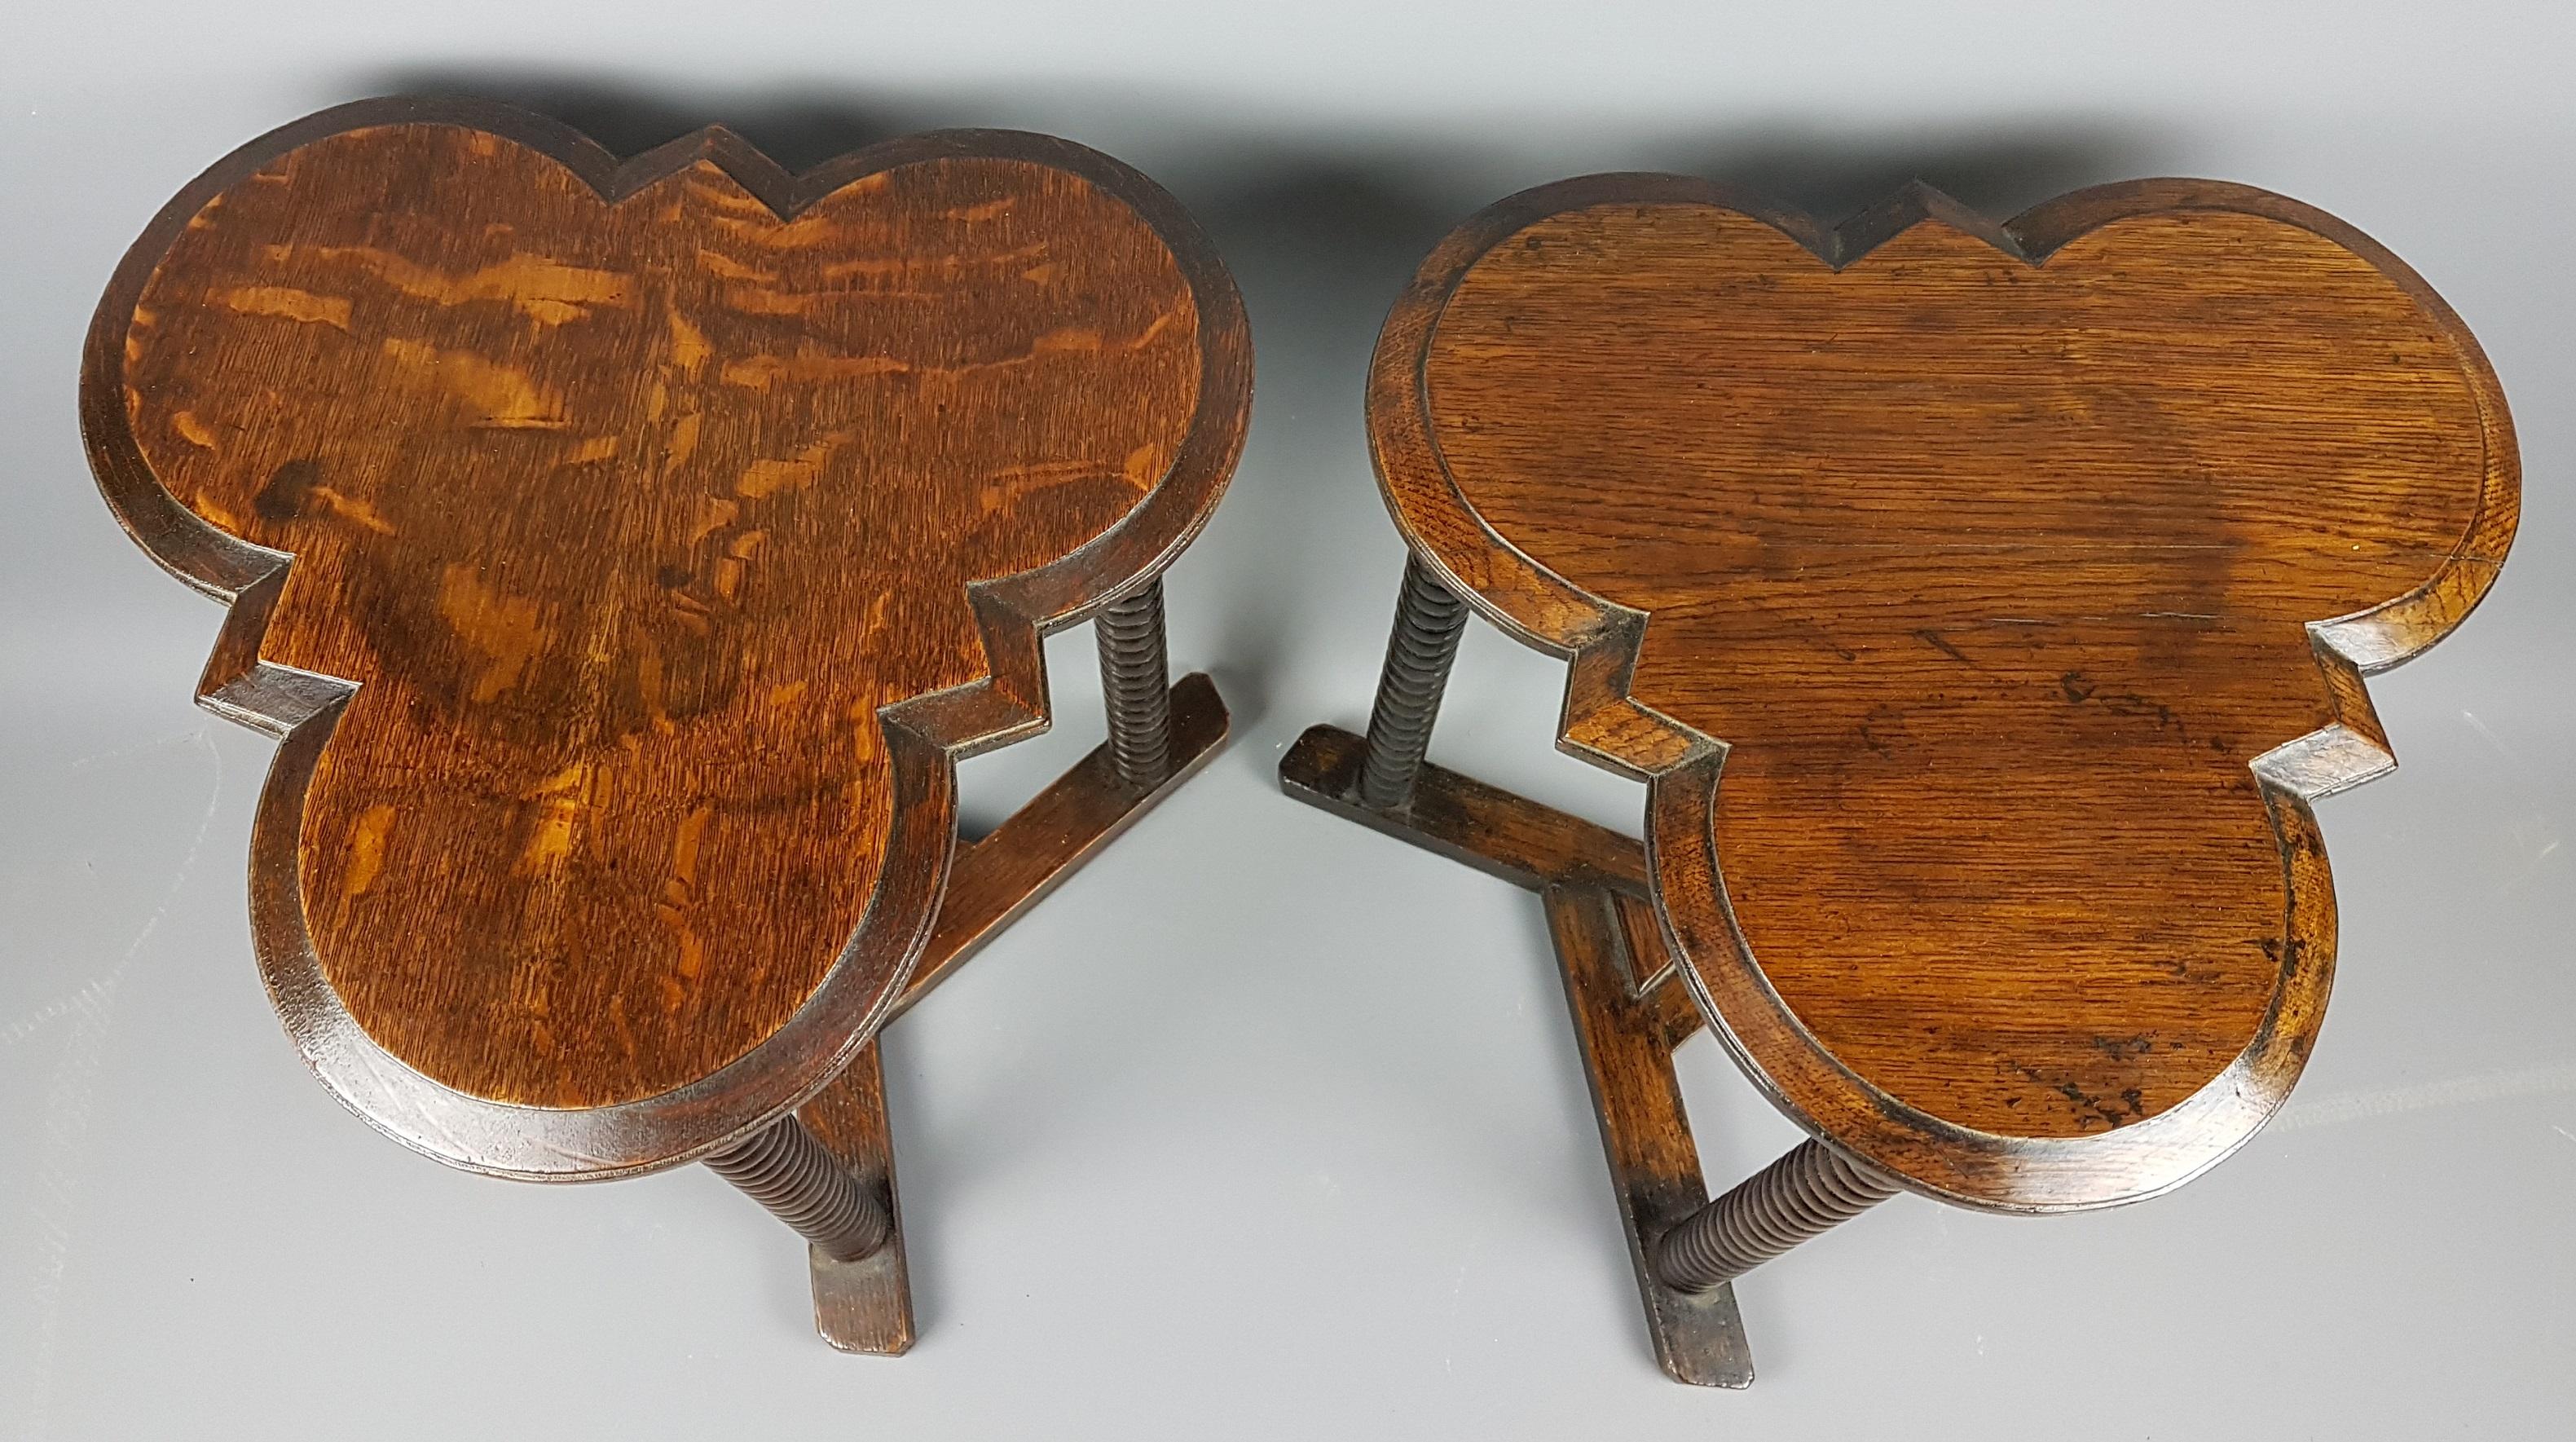 Pair of 1920s Arts and Crafts Style Oak Bobbin Tables im Zustand „Relativ gut“ im Angebot in Bodicote, Oxfordshire